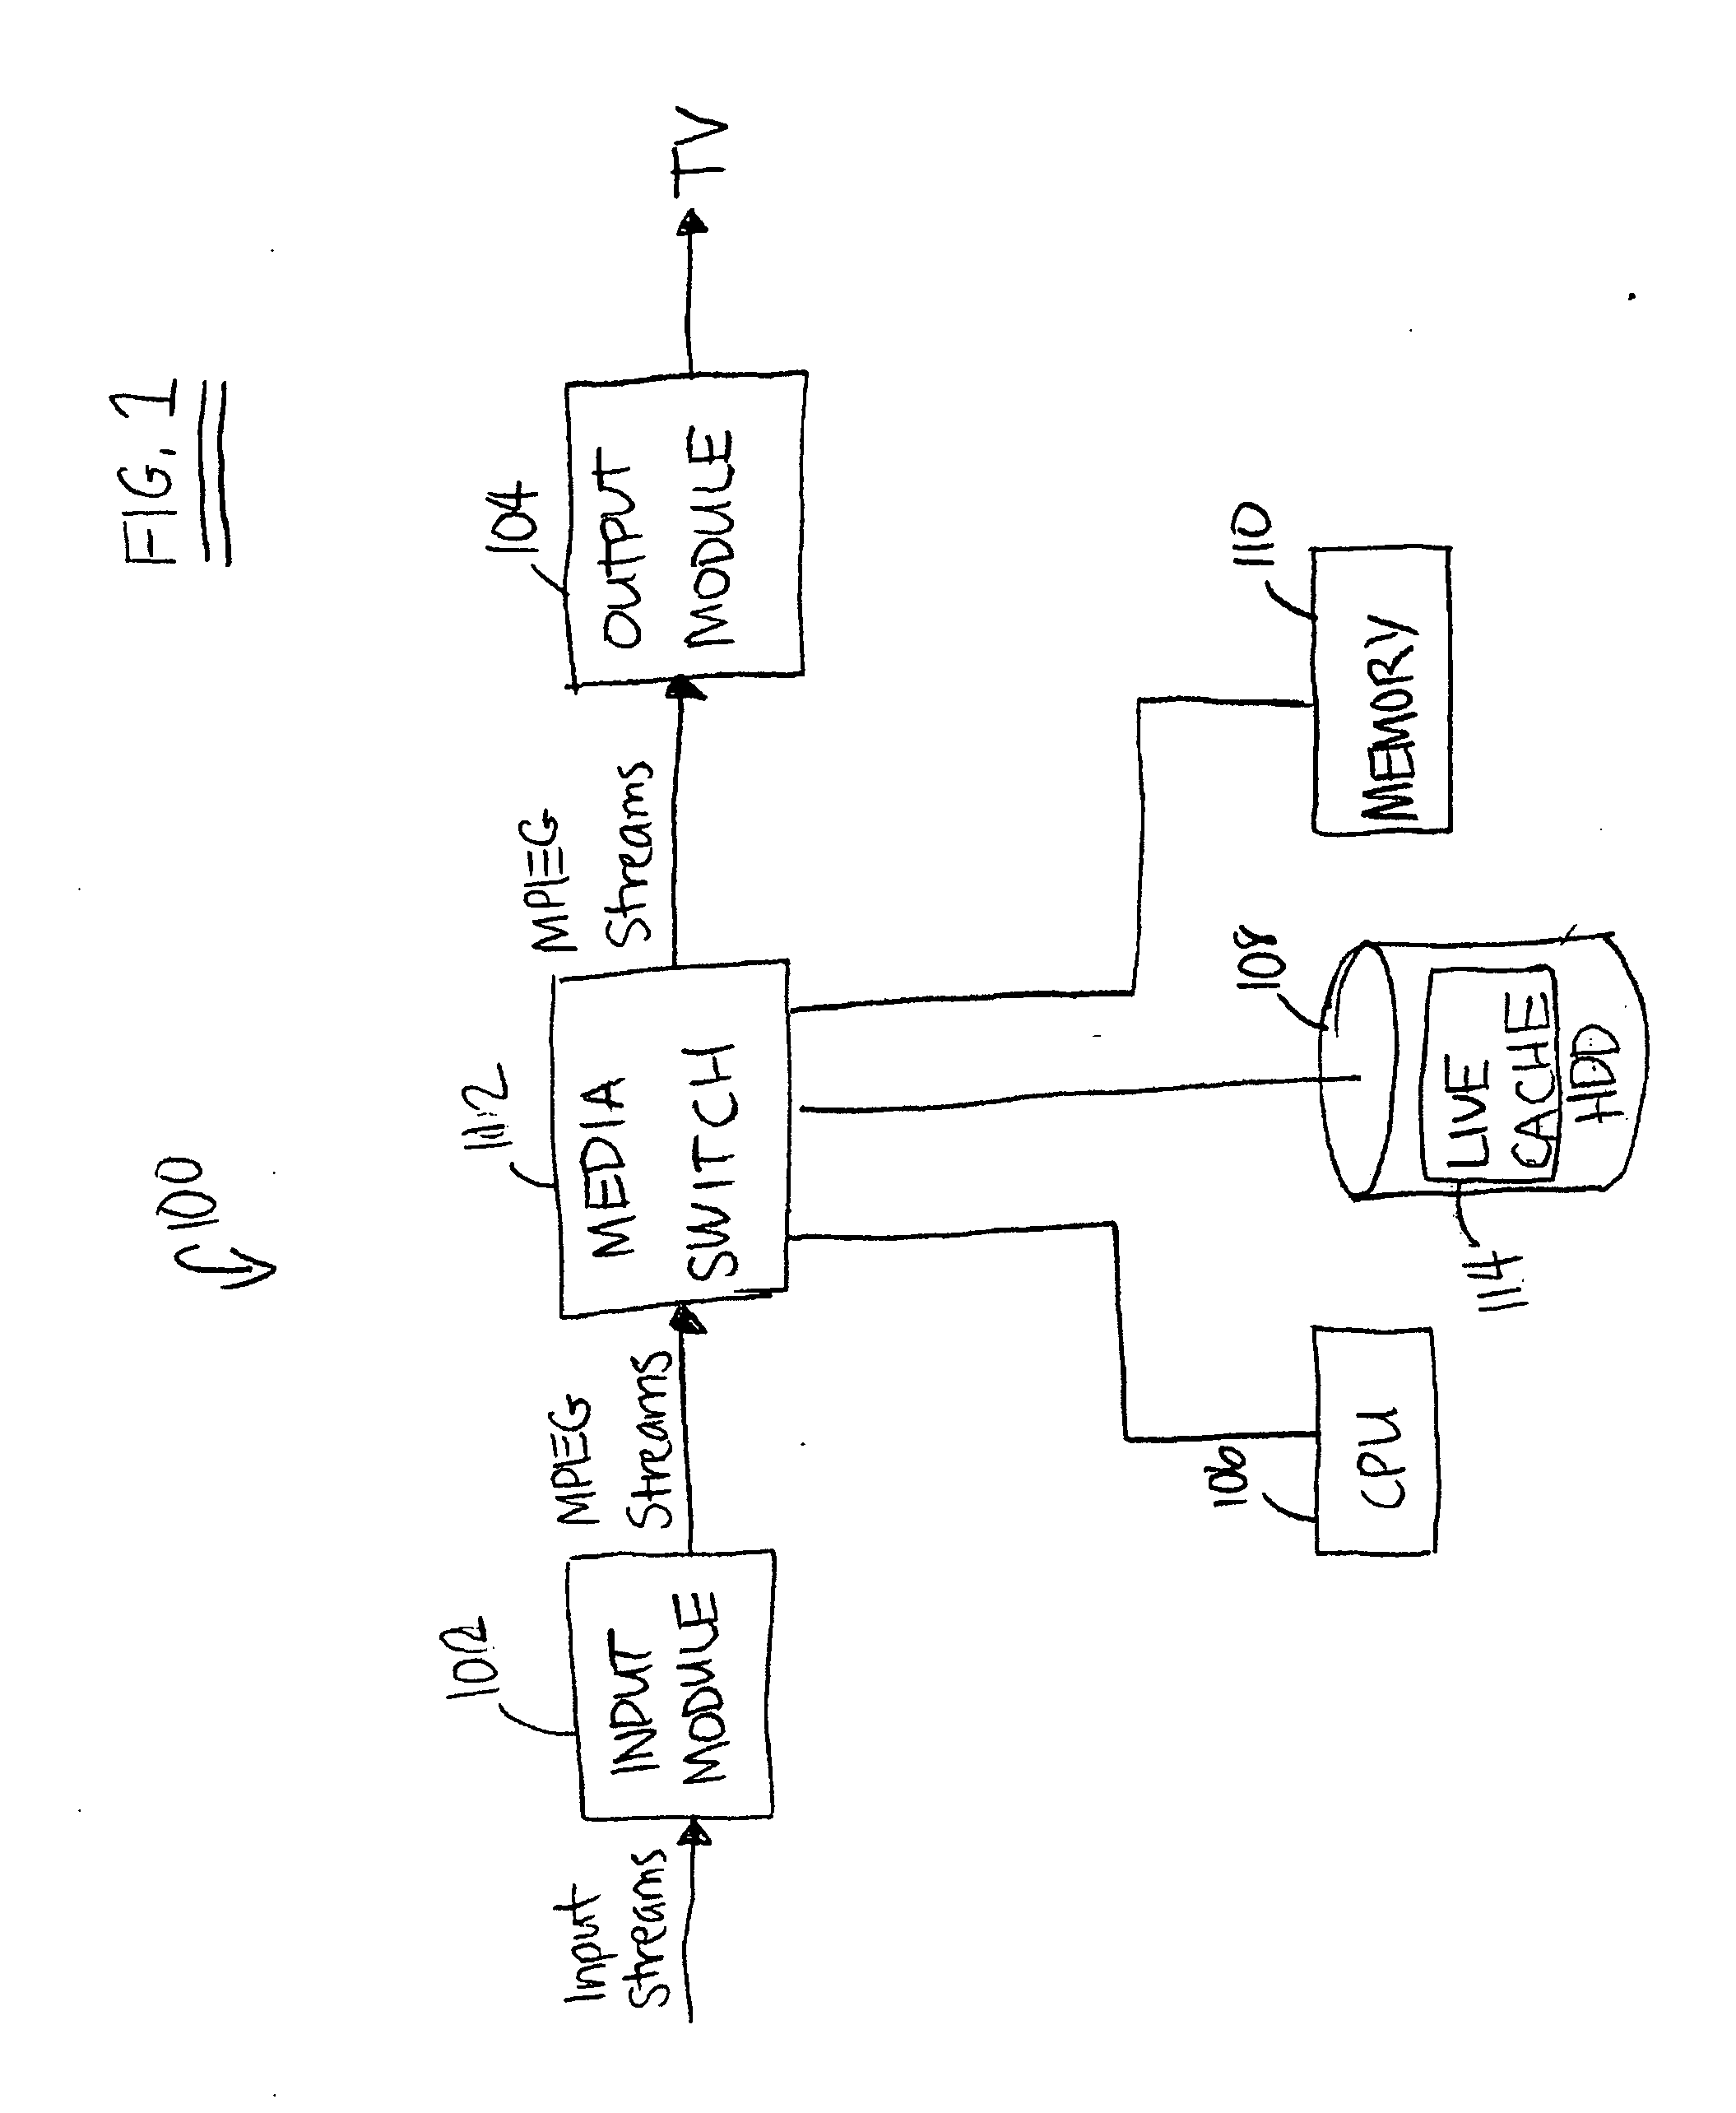 Method and apparatus for navigating video content